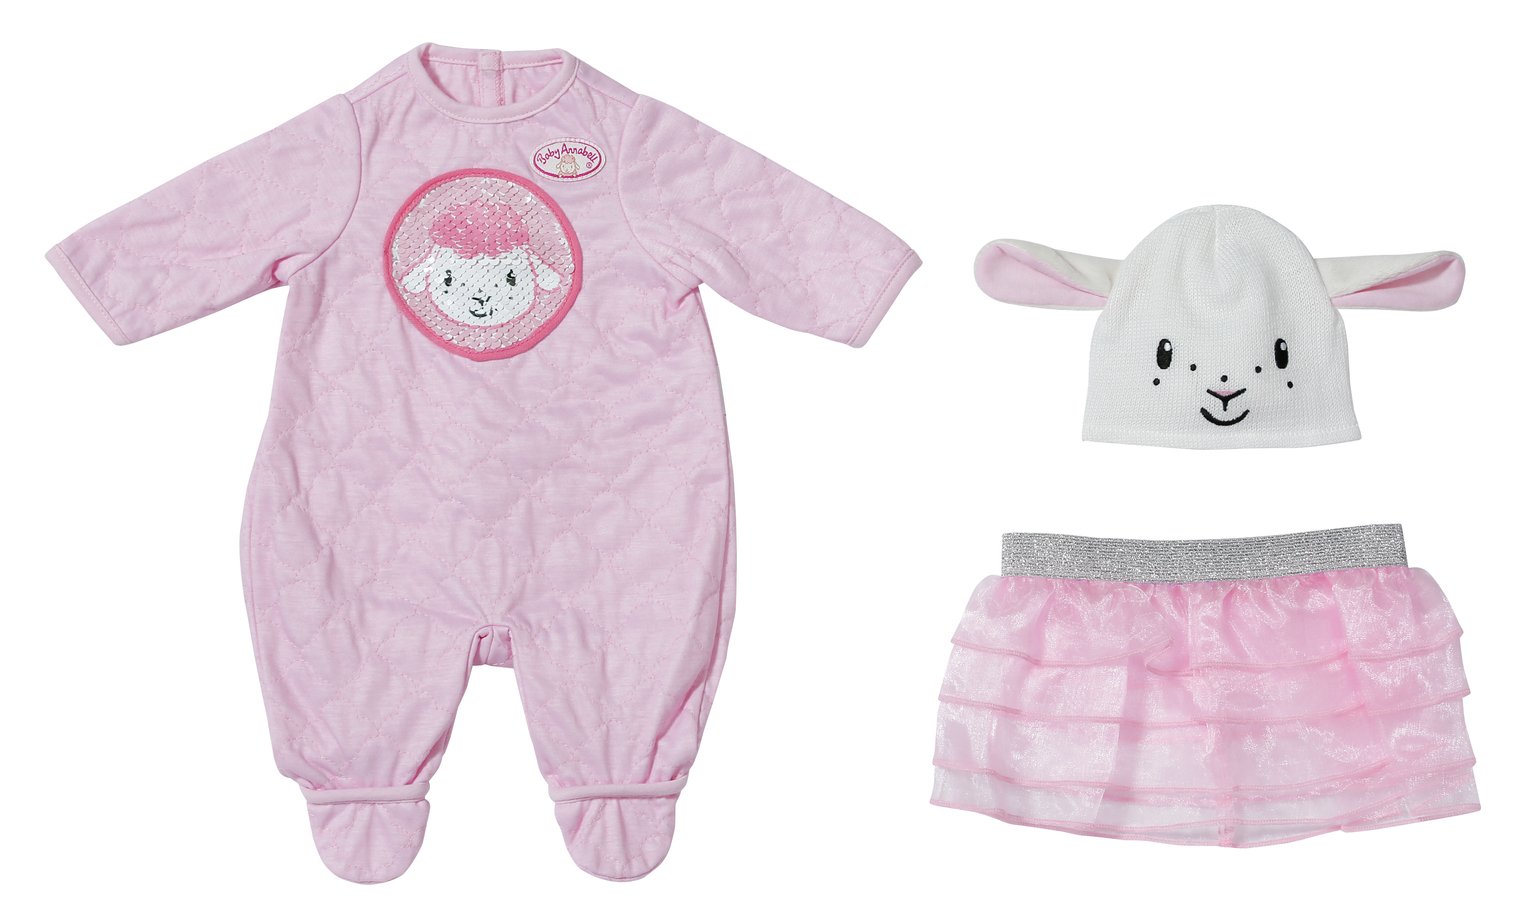 Baby Annabell Deluxe Sequin Set Review